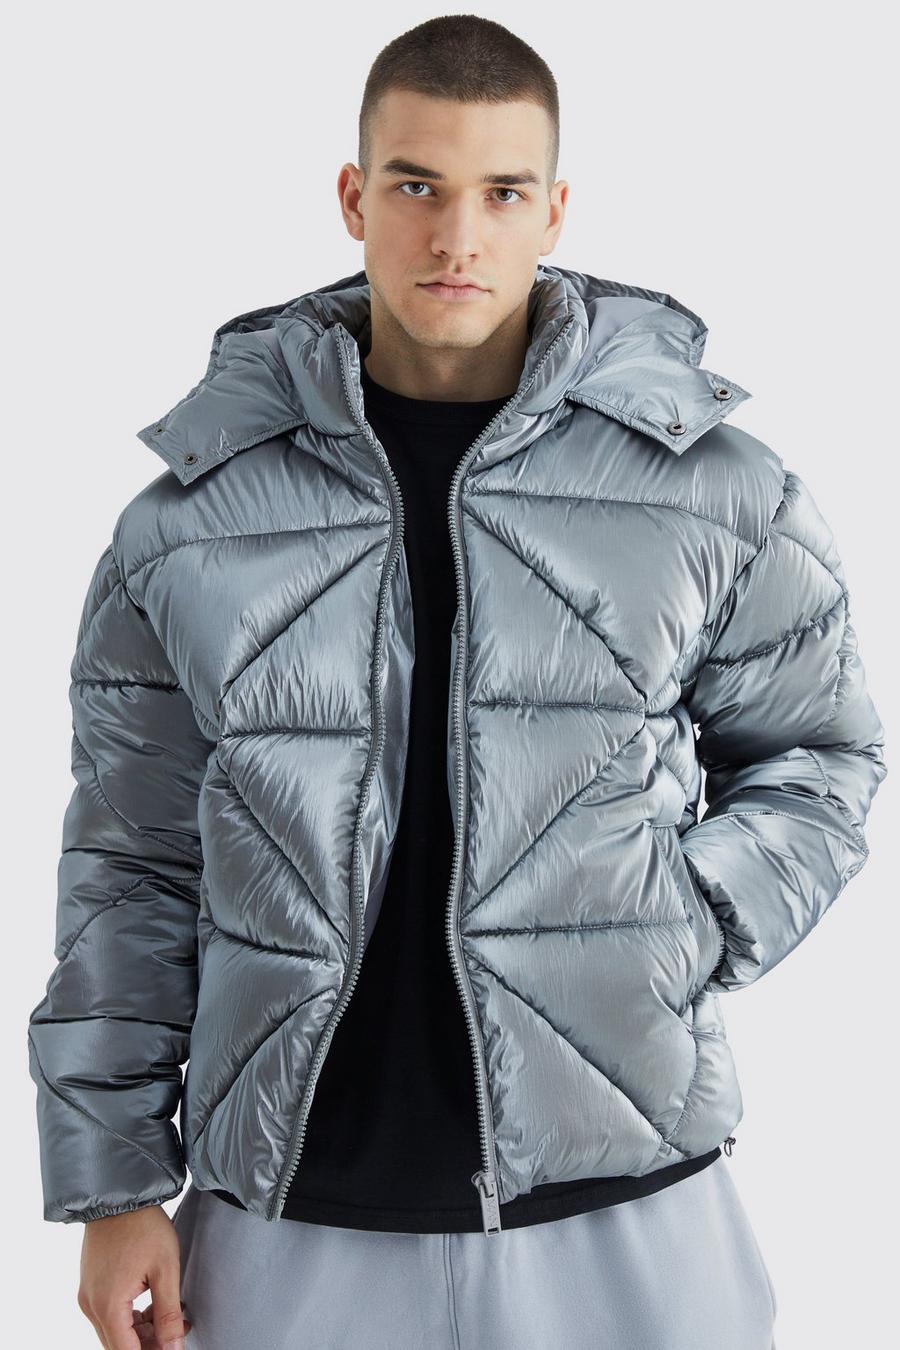 Charcoal grey Tall Metallic Boxy Quilted Puffer